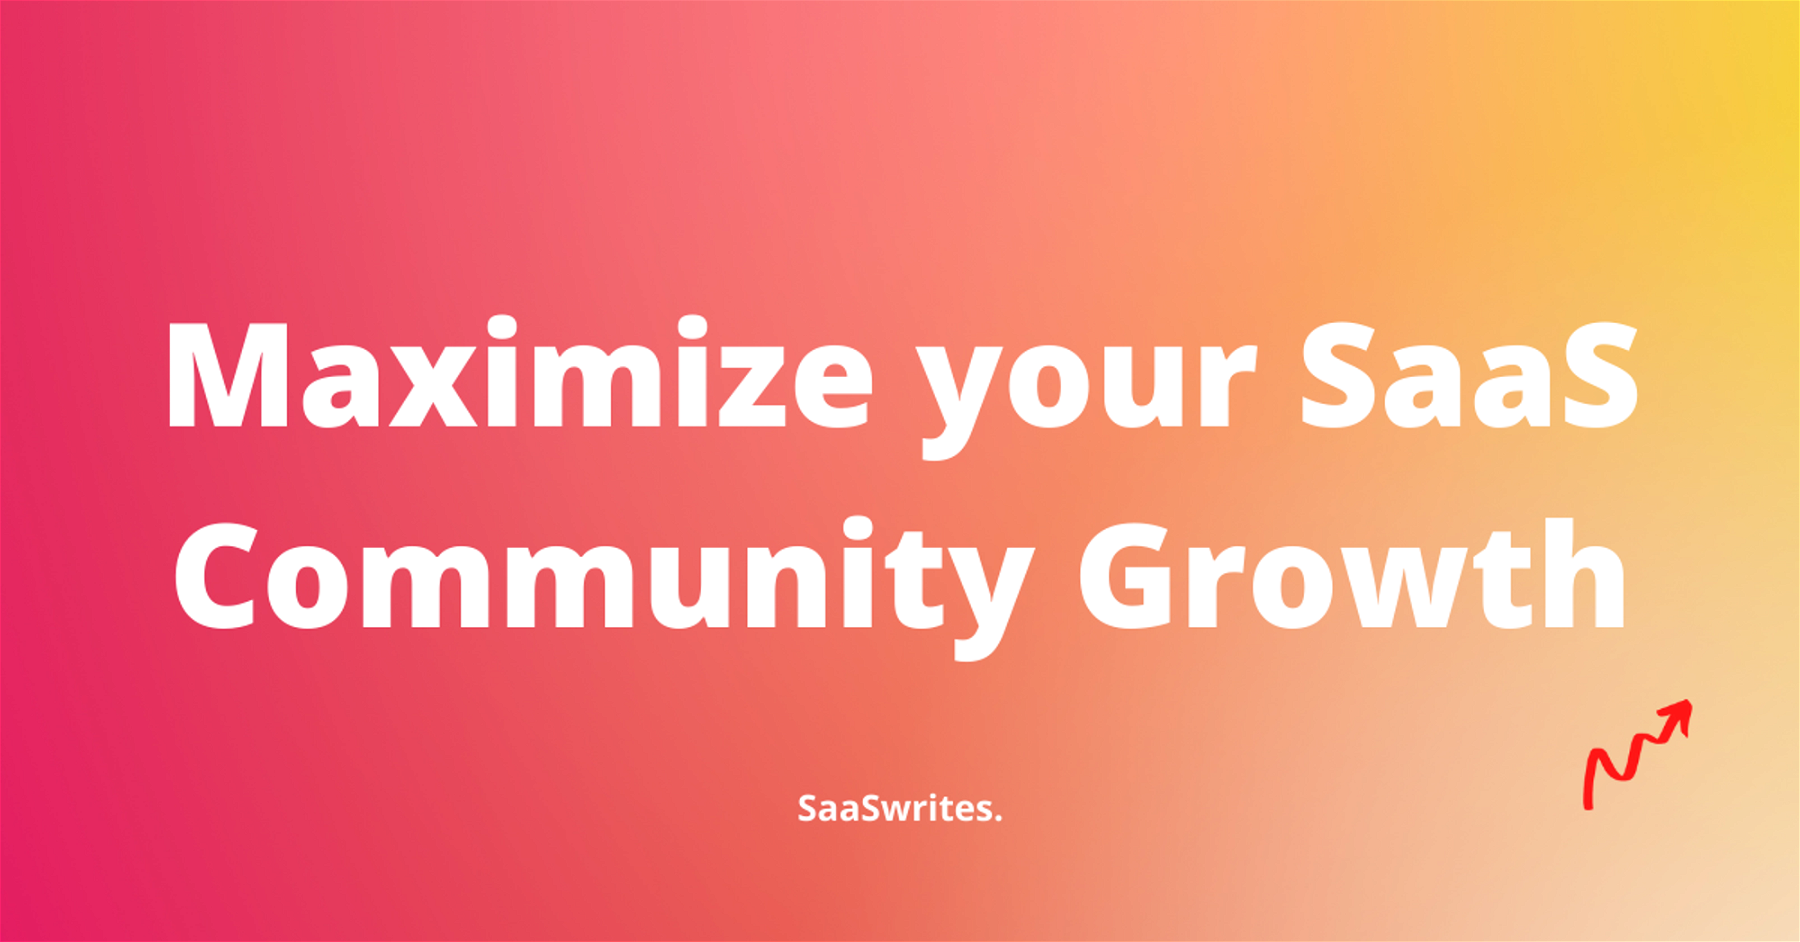 How to maximize your community growth?